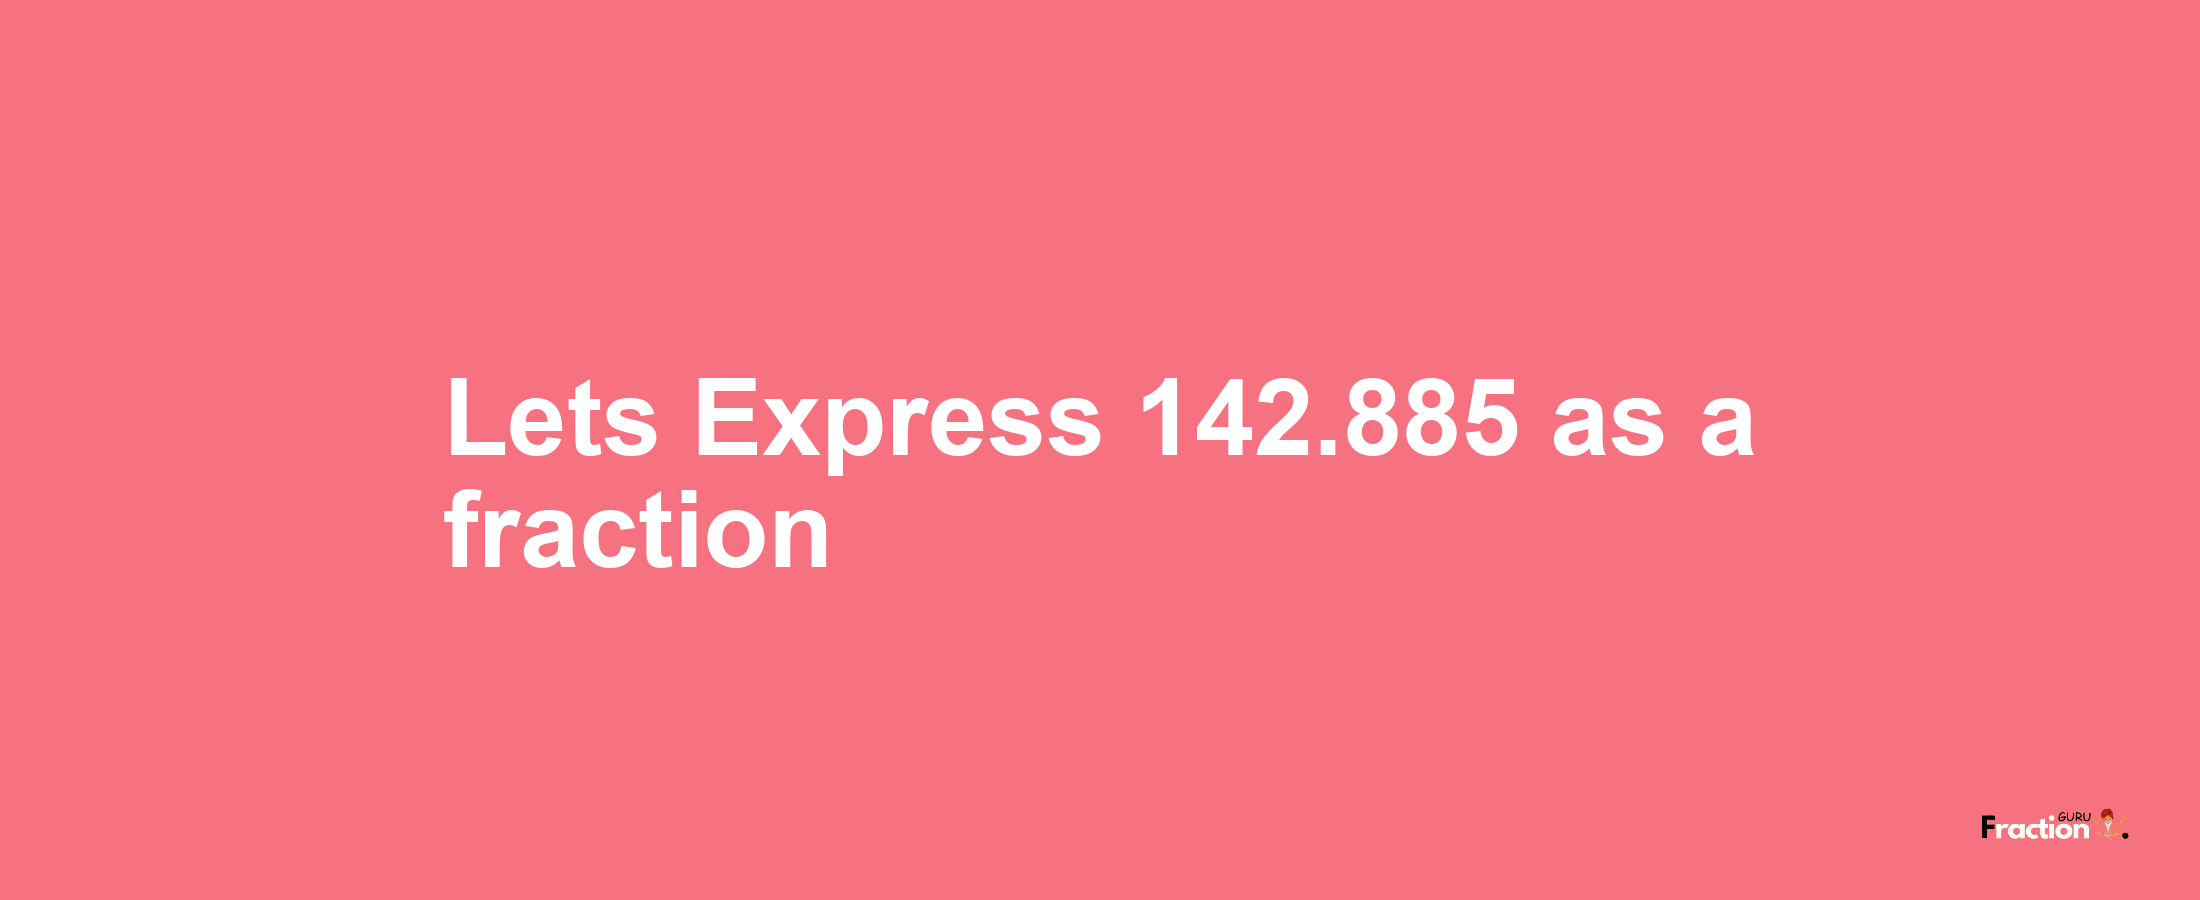 Lets Express 142.885 as afraction